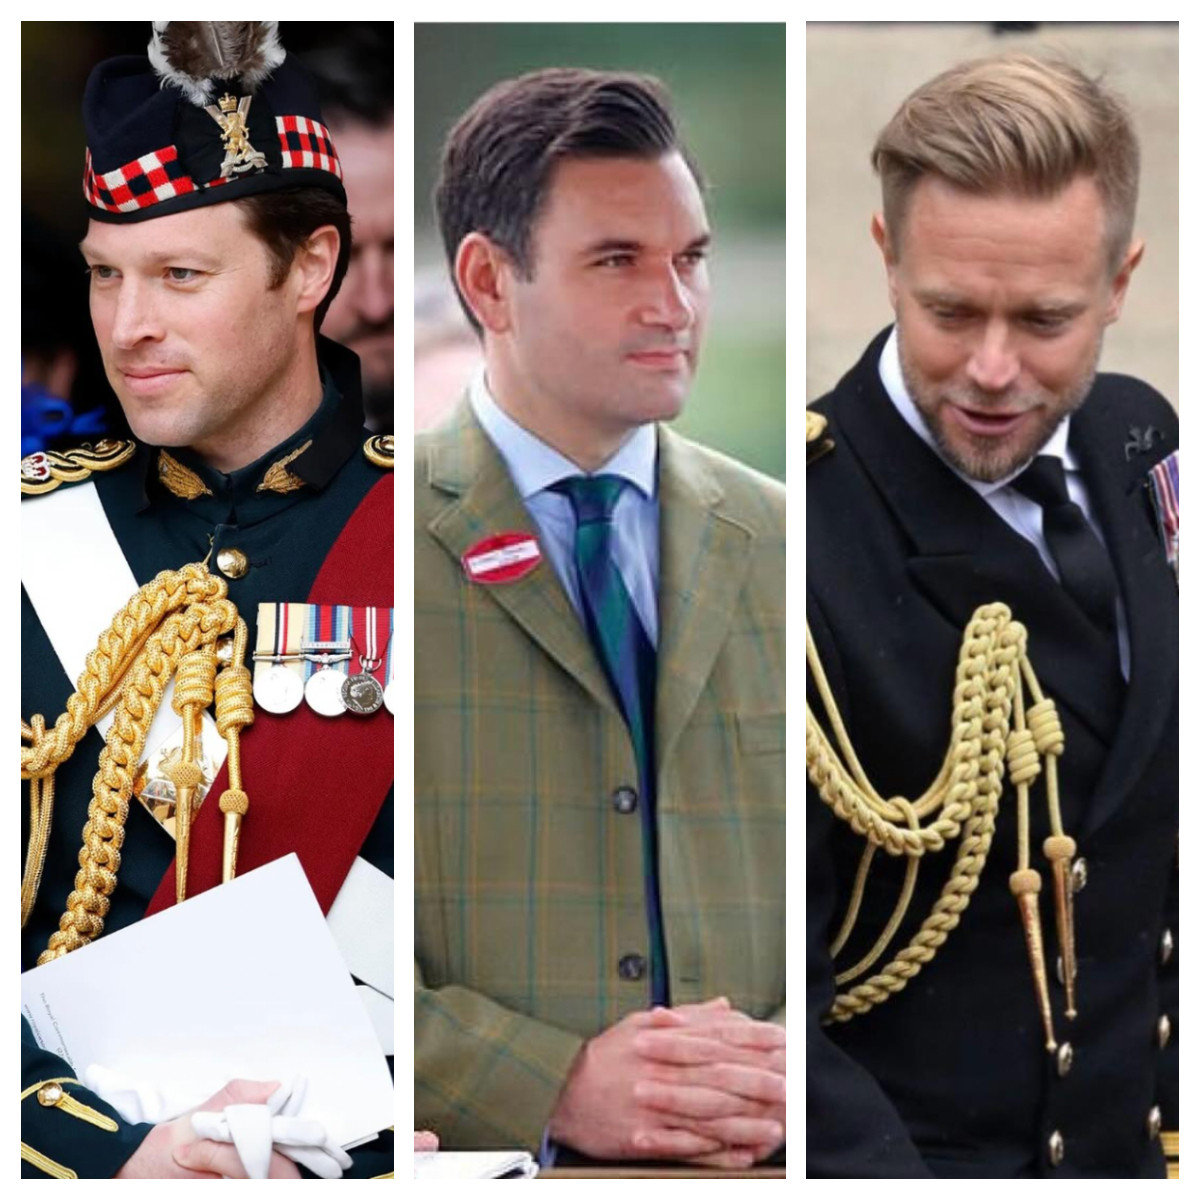 Jonathan Thompson, Tom White and Rob Dixon are all serving equerries to the British royal family. Photos: @theroyalmemorabilia, @william_catherine82, @royal_family_history/Instagram
